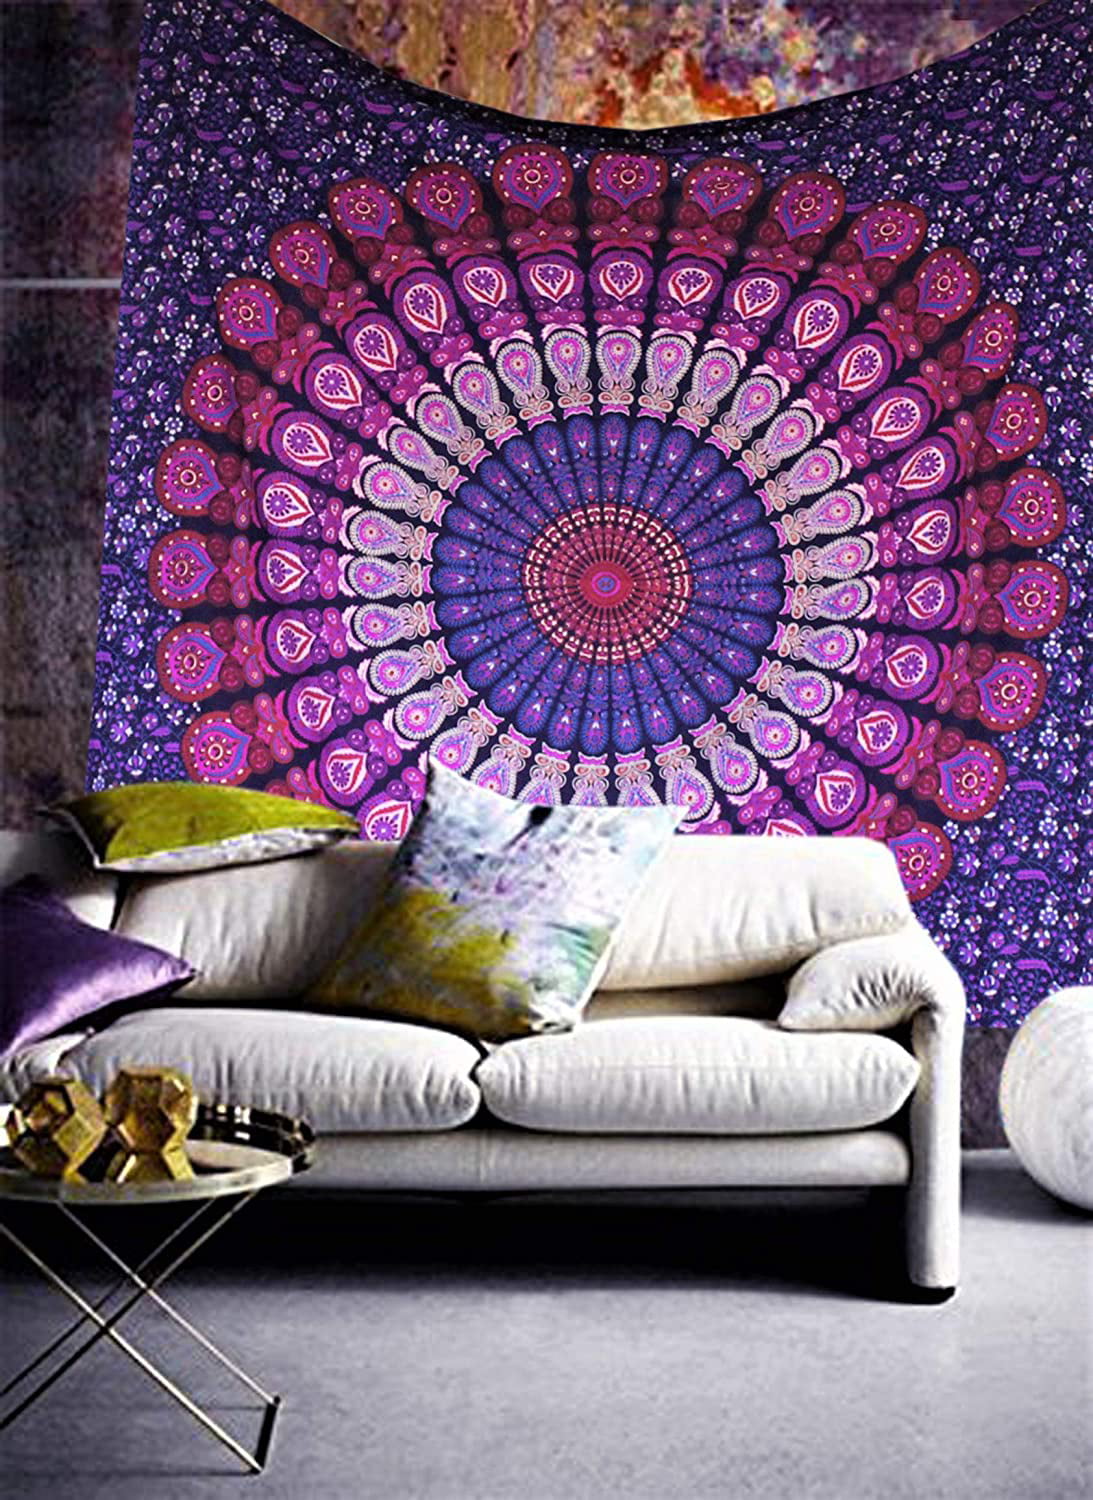 New Indian Mandala Bedspread Hippie Tapestry Wall Hanging Throw Rug Room Decor 